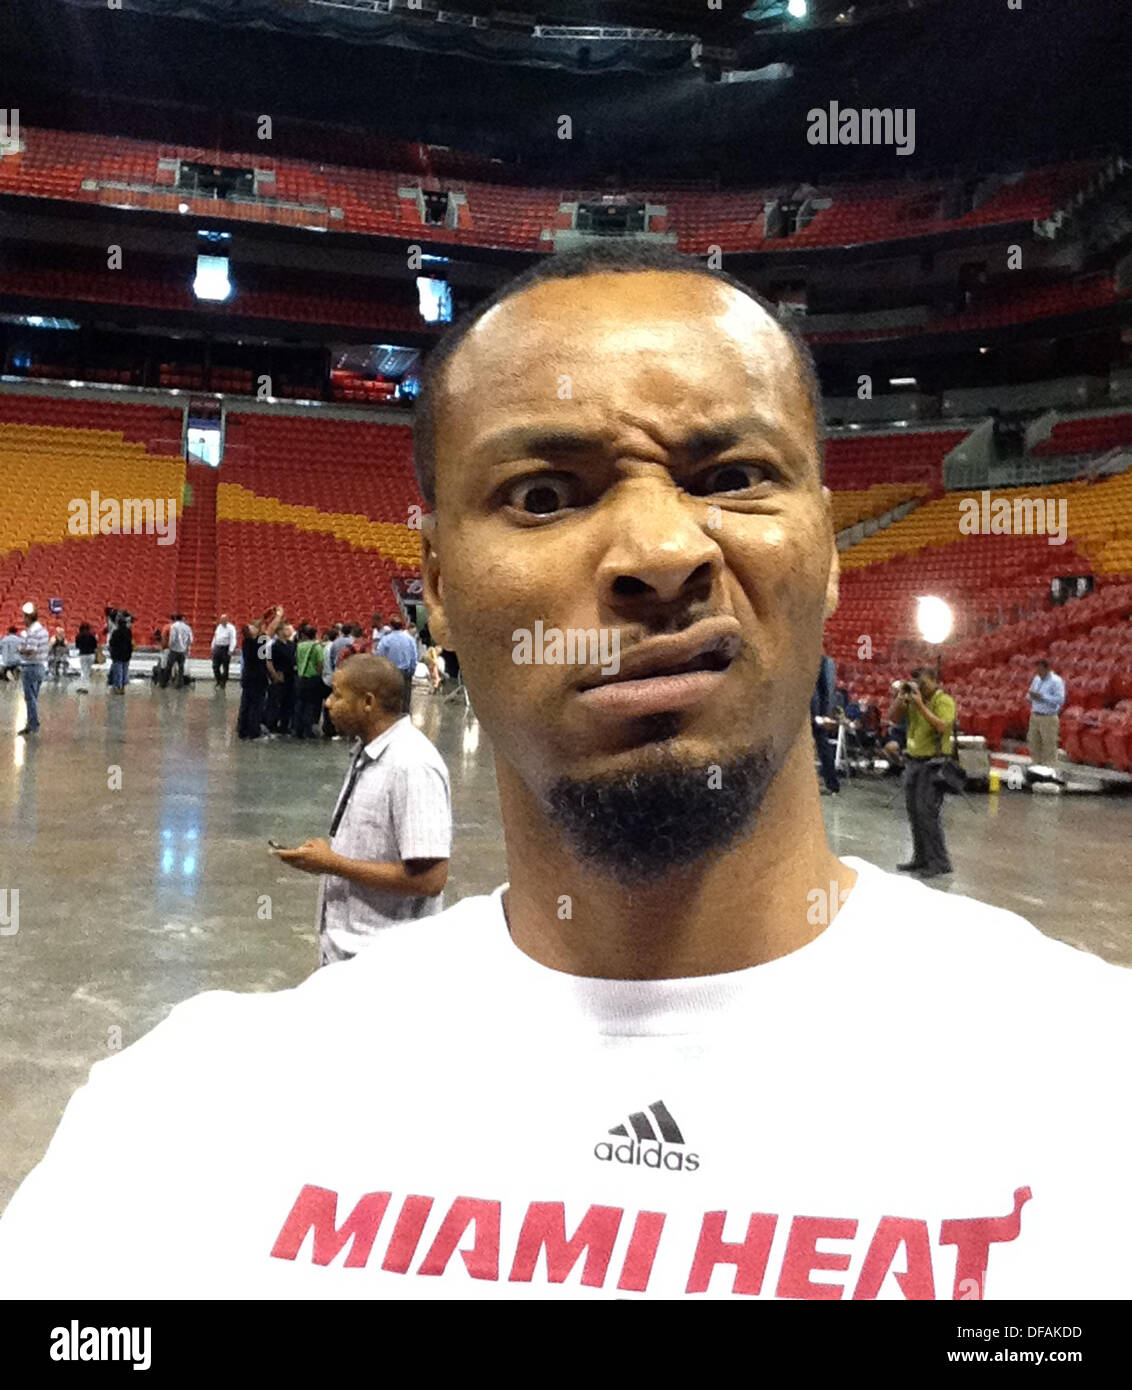 This Sept. 30, 2013, file photo shows Miami Heat basketball player